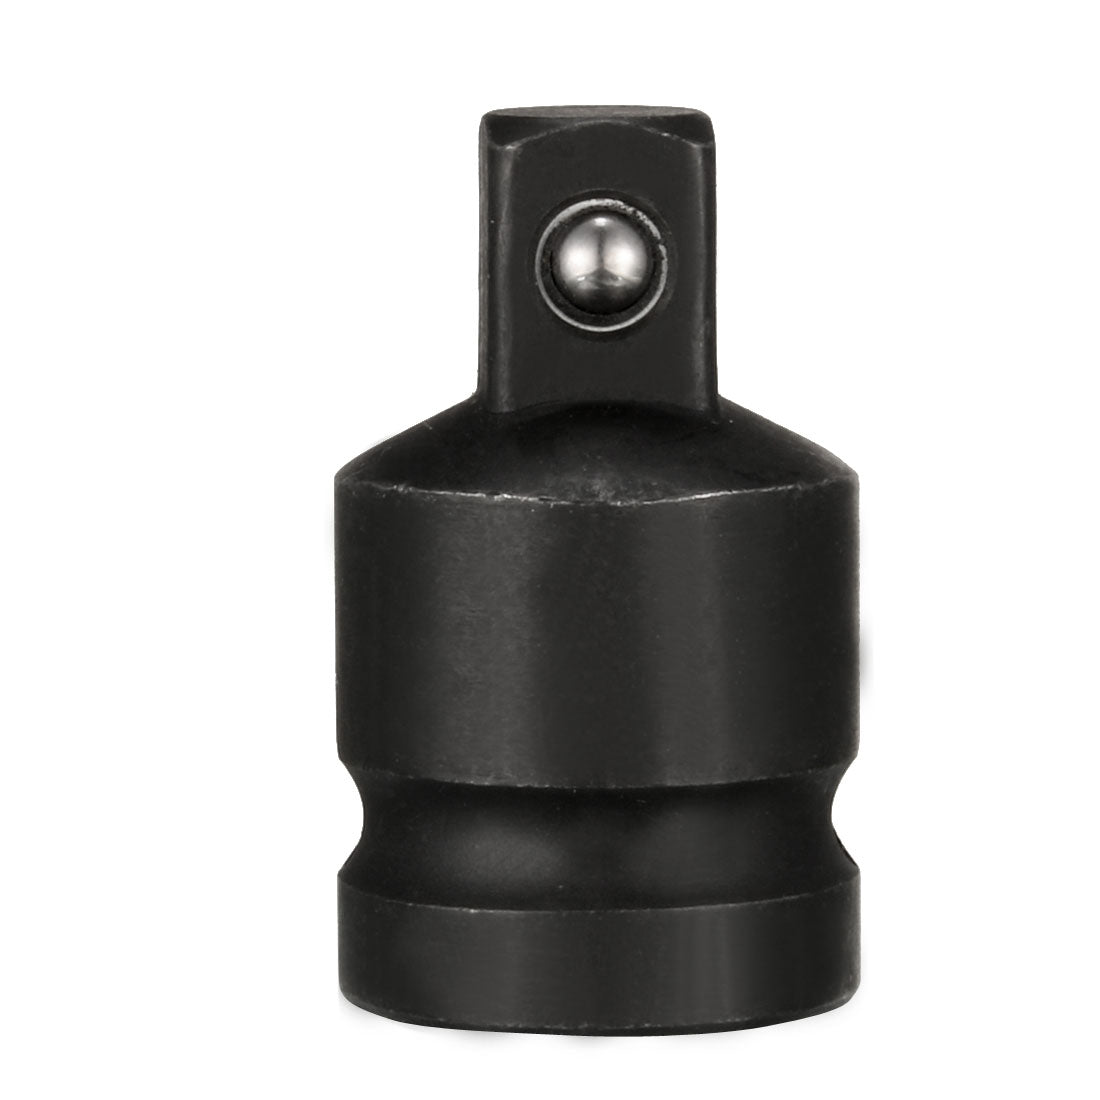 uxcell Uxcell Impact Socket Reducer for Ratchet Wrenches, Female to Male, Cr-Mo